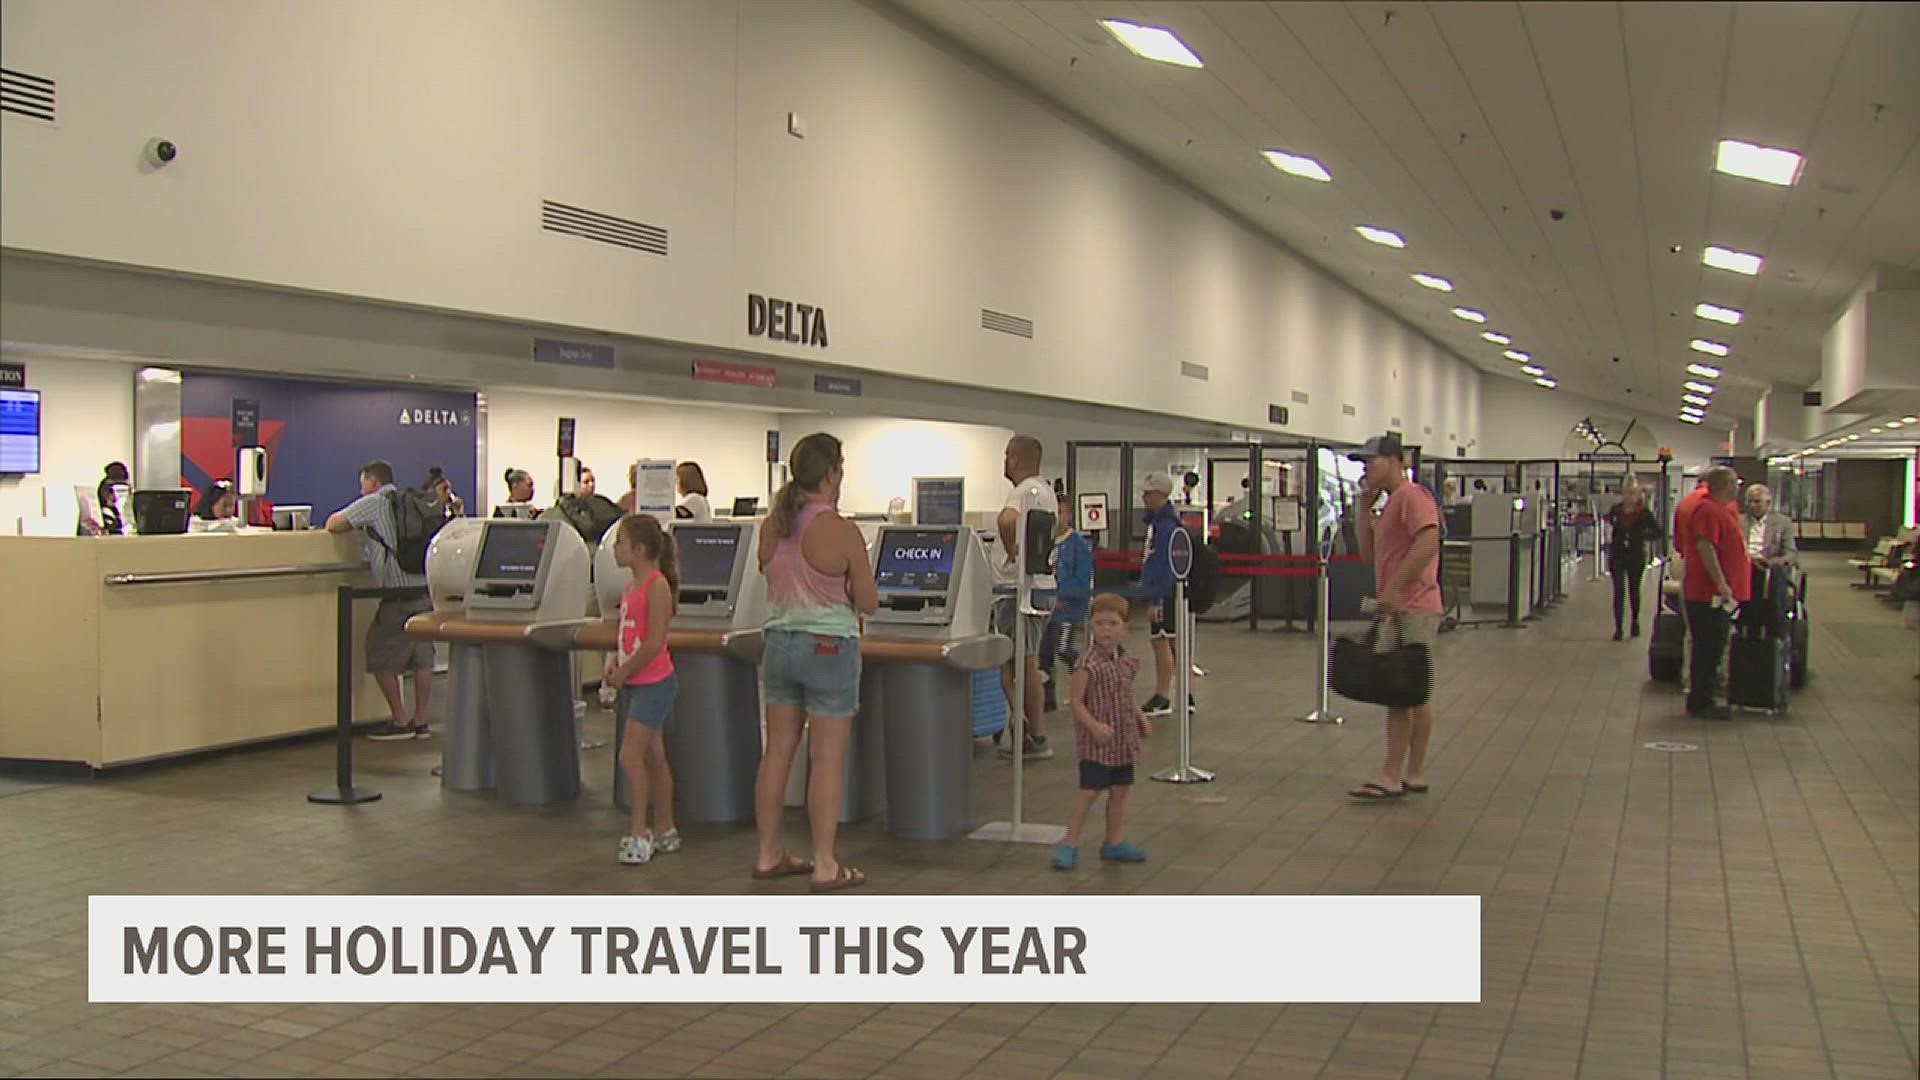 Holiday traveling is still increasing despite the increased cost of travel. Experts predict a large turnout of travelers on the roads and in airports.